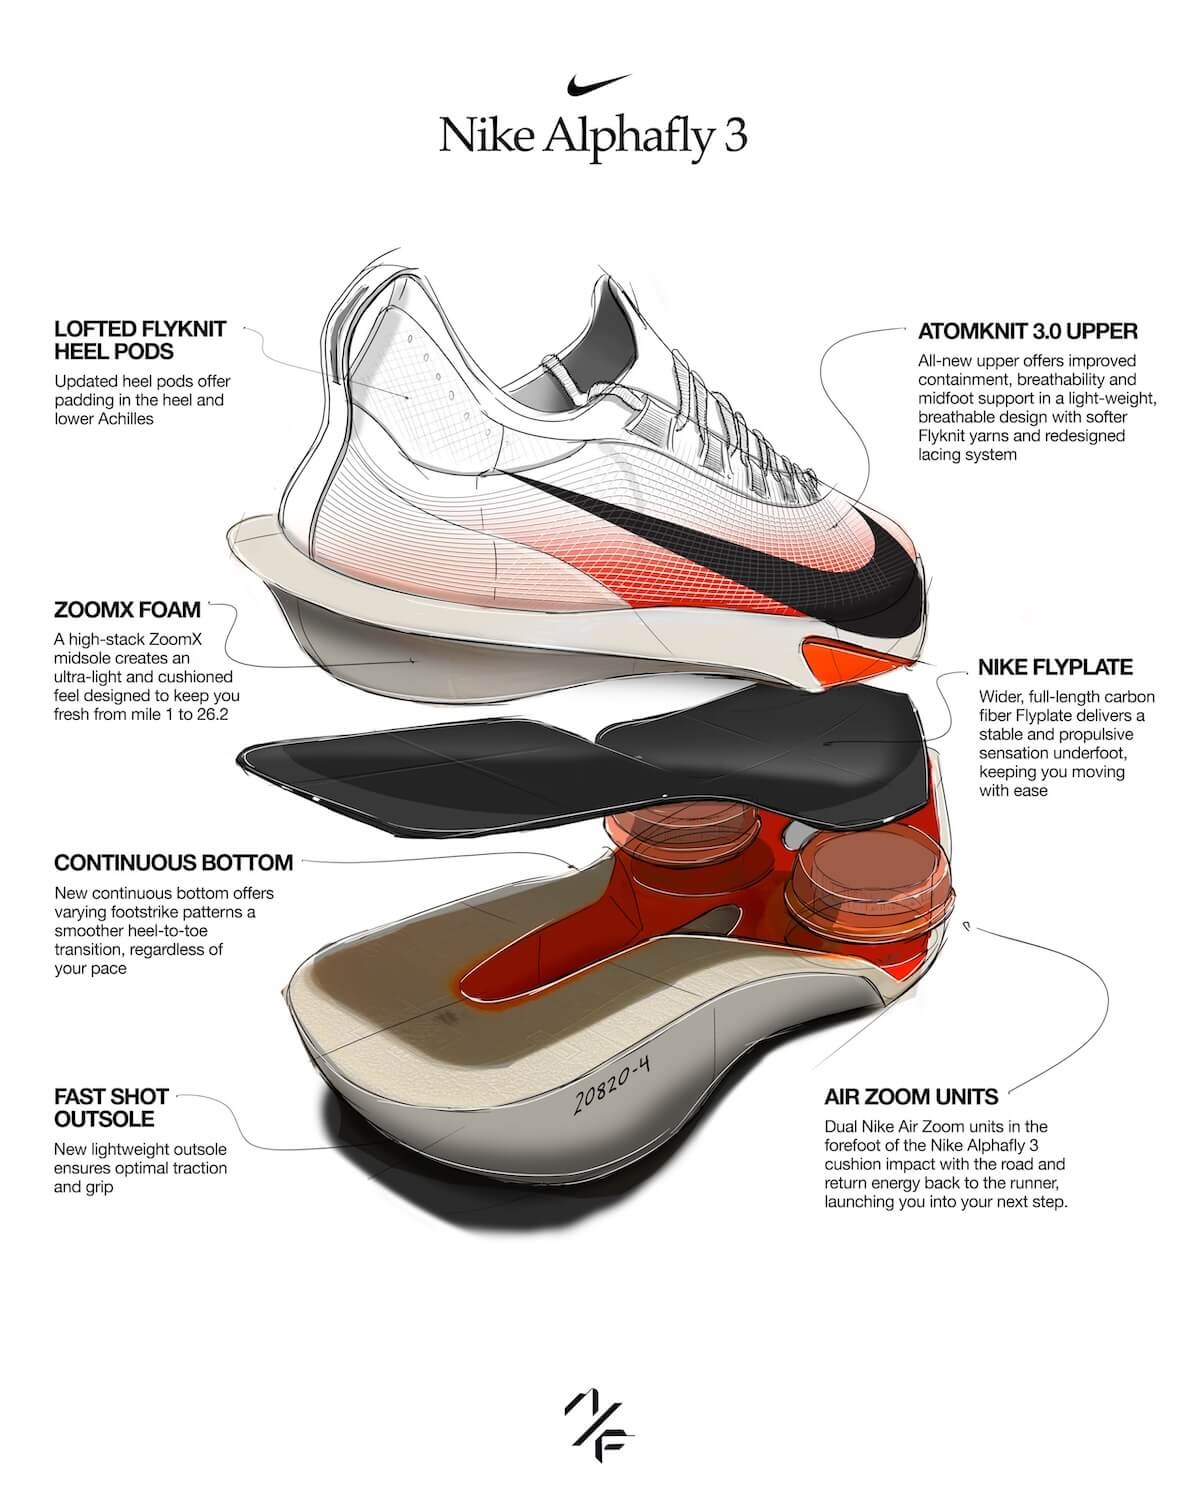 Design and Technology of Nike Alphafly 3